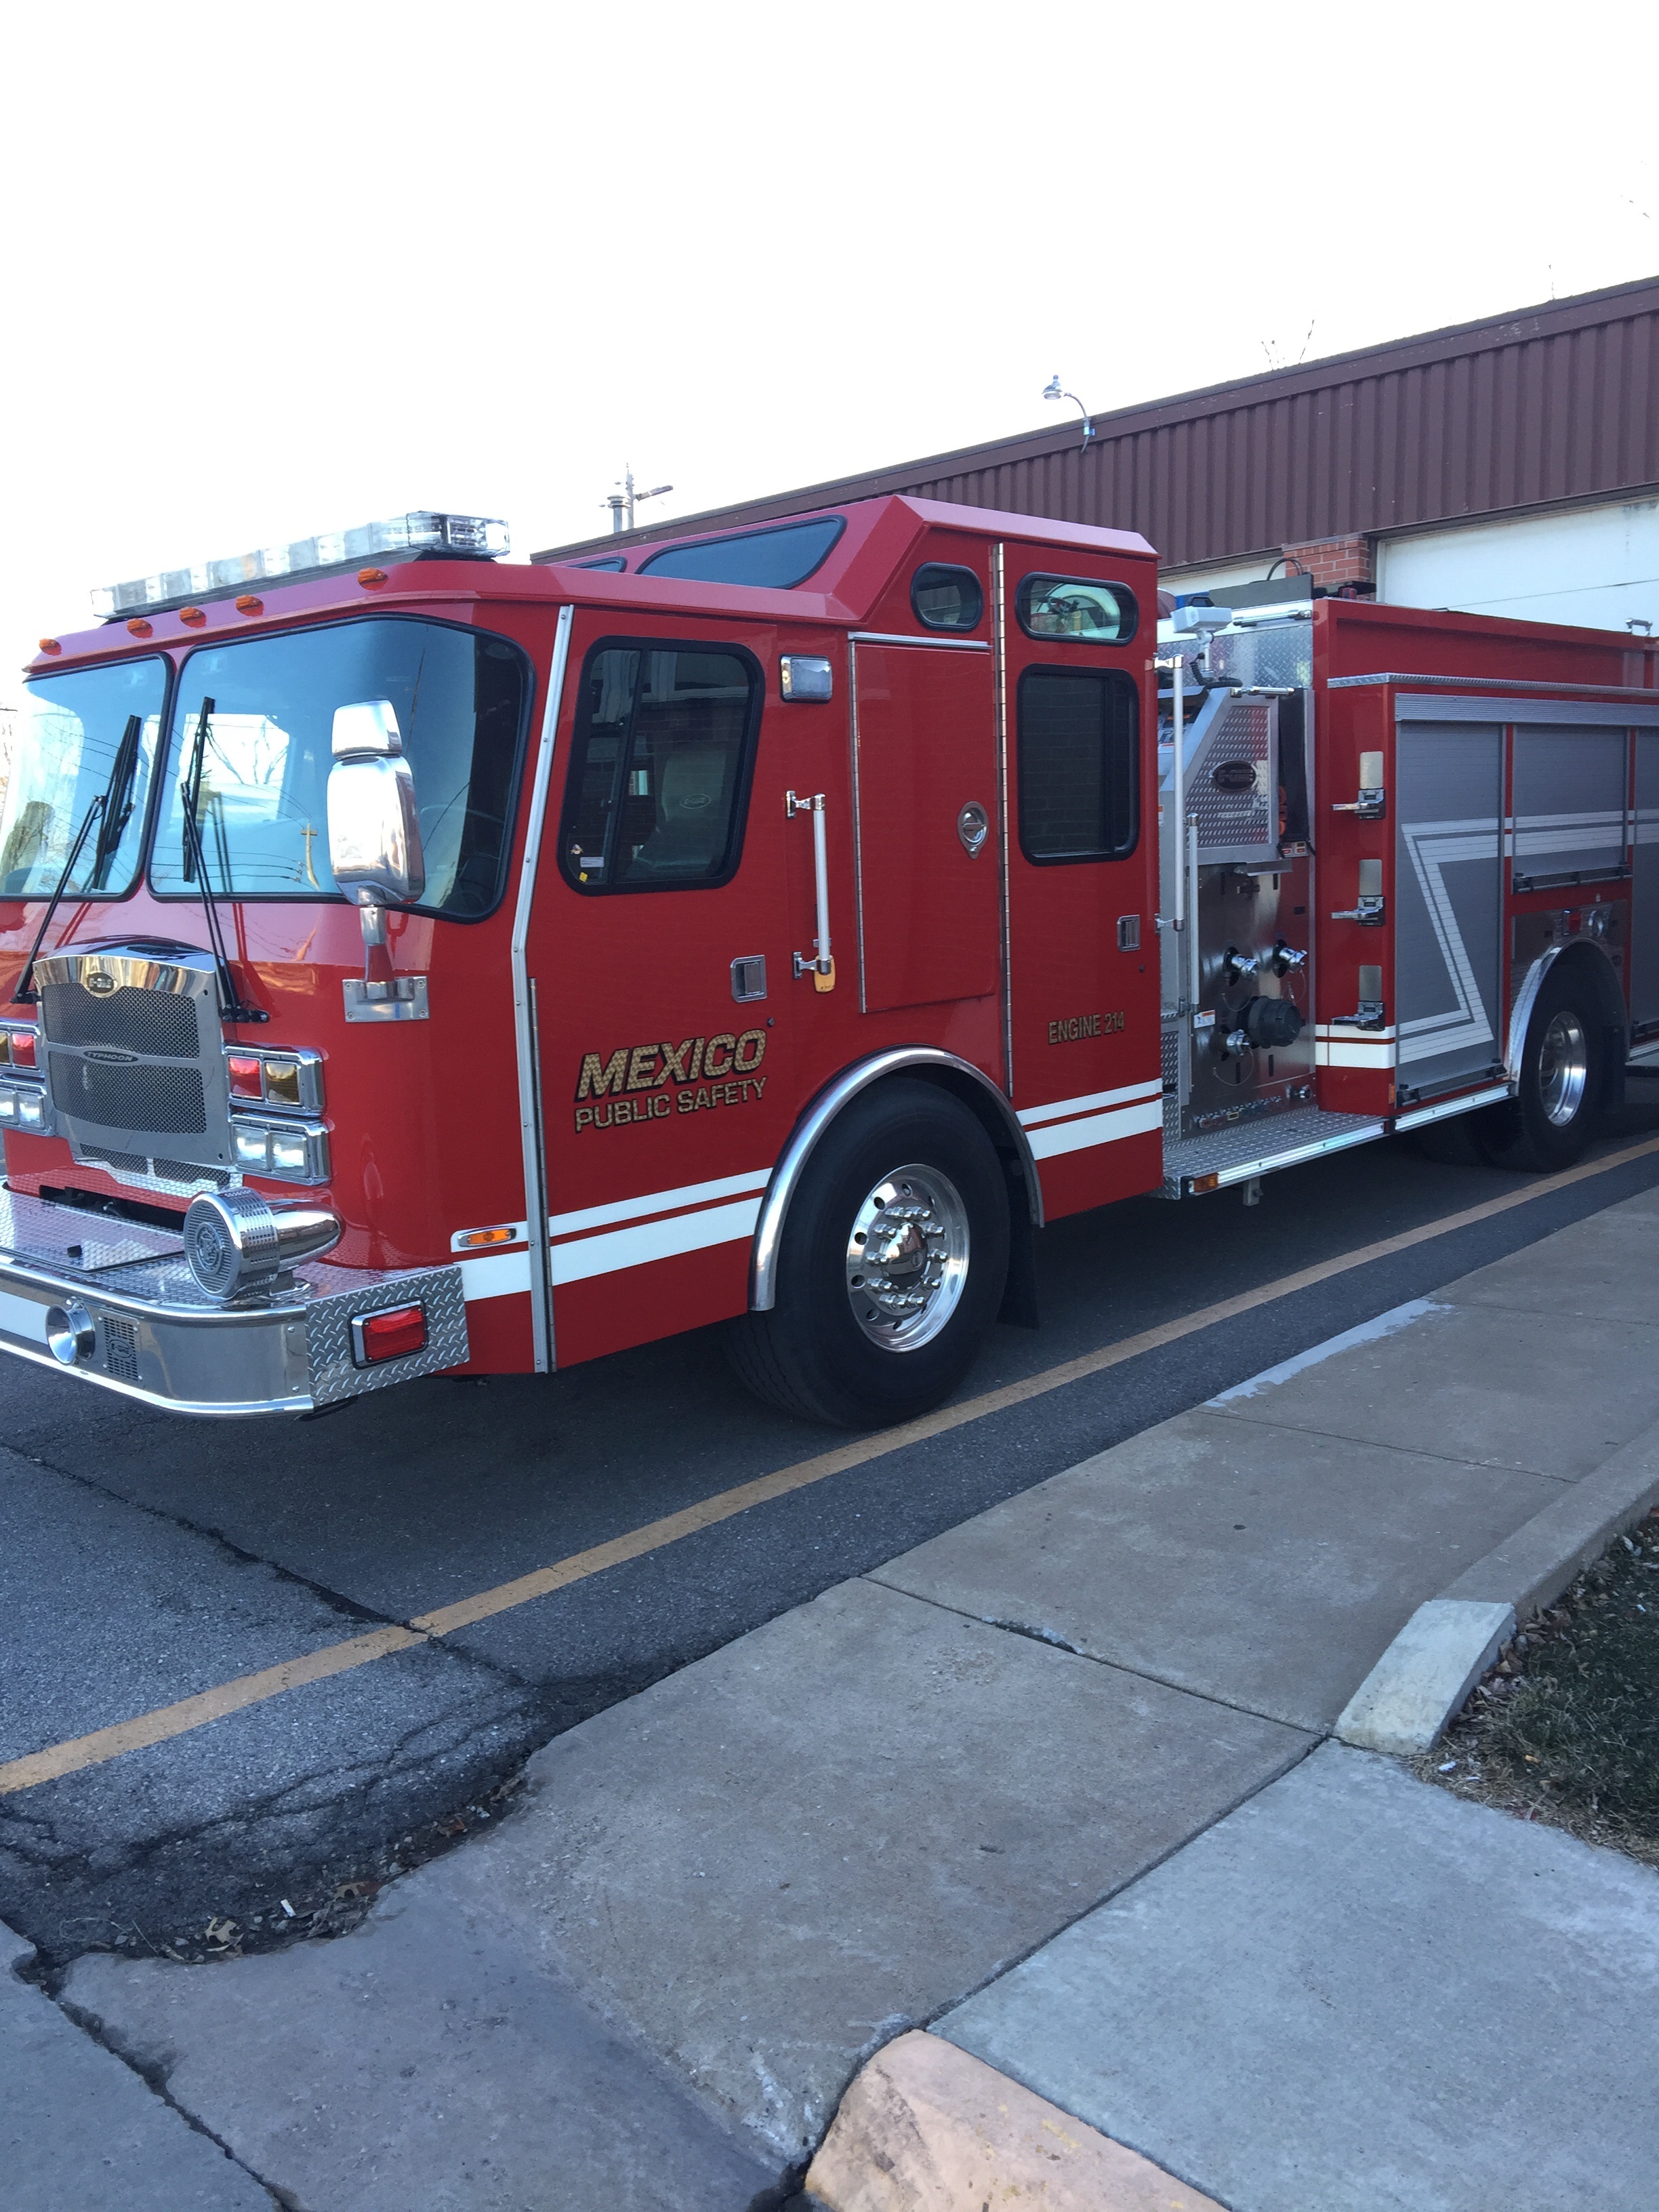 Unattended Cooking Apparent Cause Of Kitchen Fire At Rock Springs In Mexico